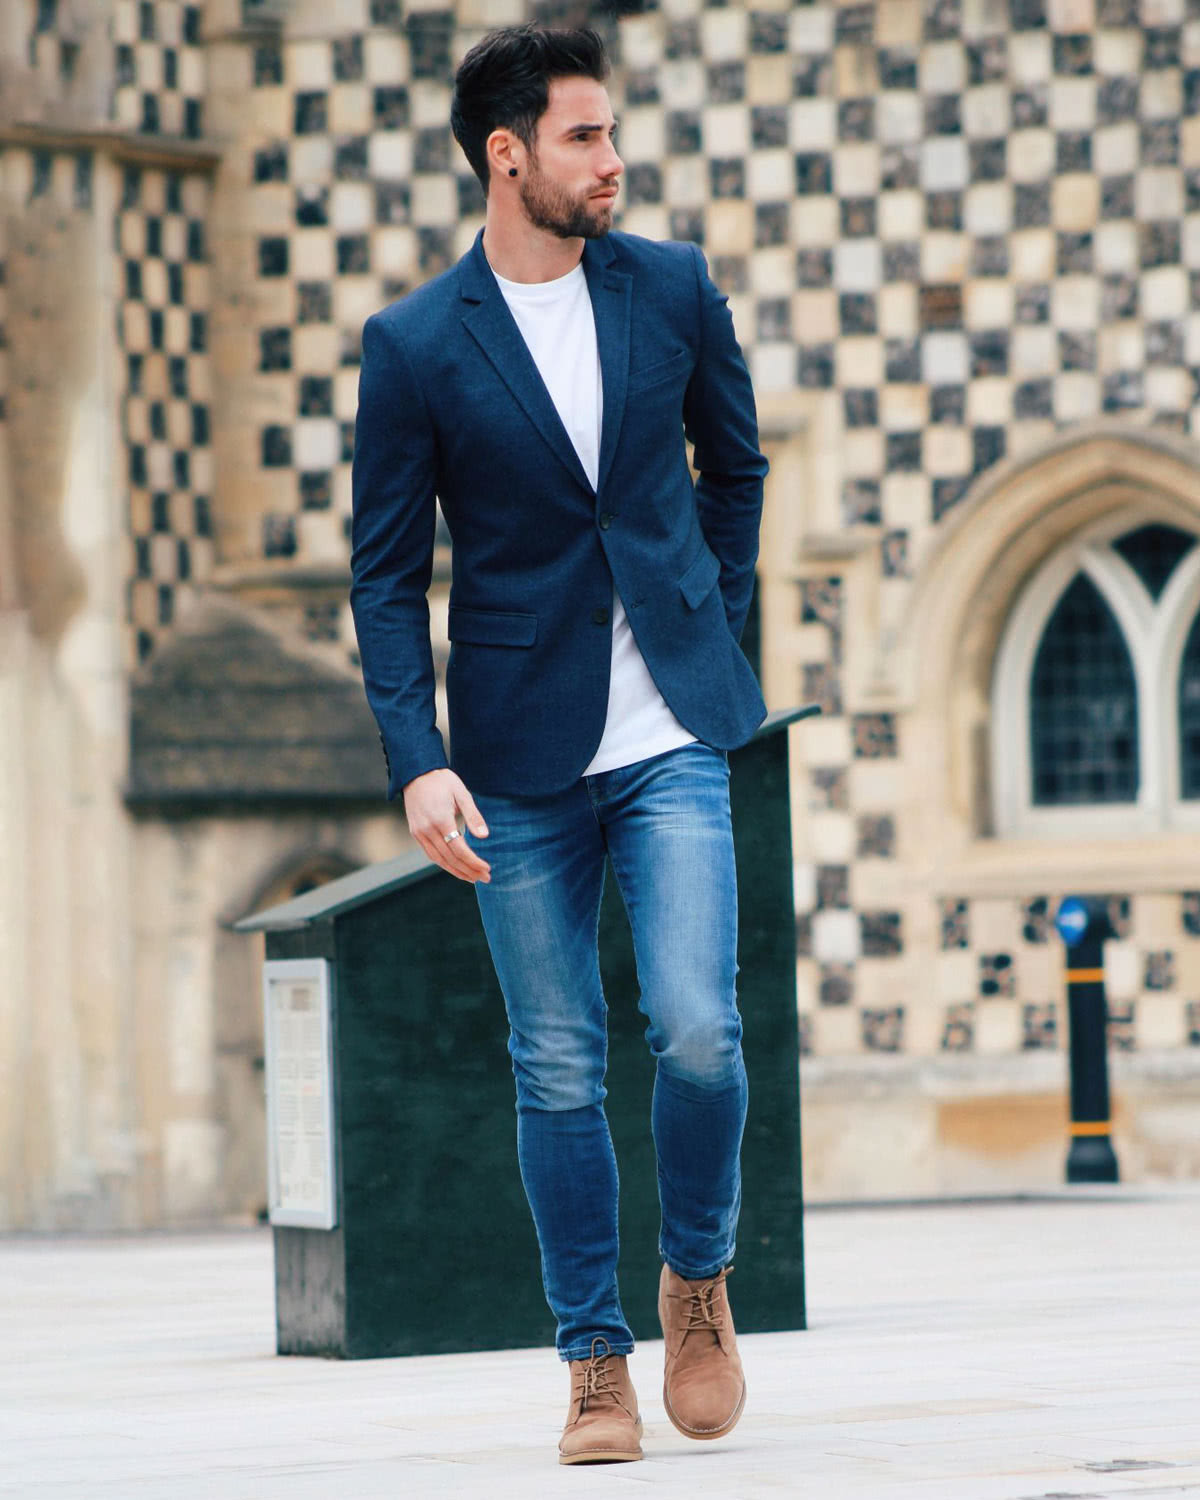 Smart Casual Dress Code For Men: Ultimate Style Guide (2019 Updated)